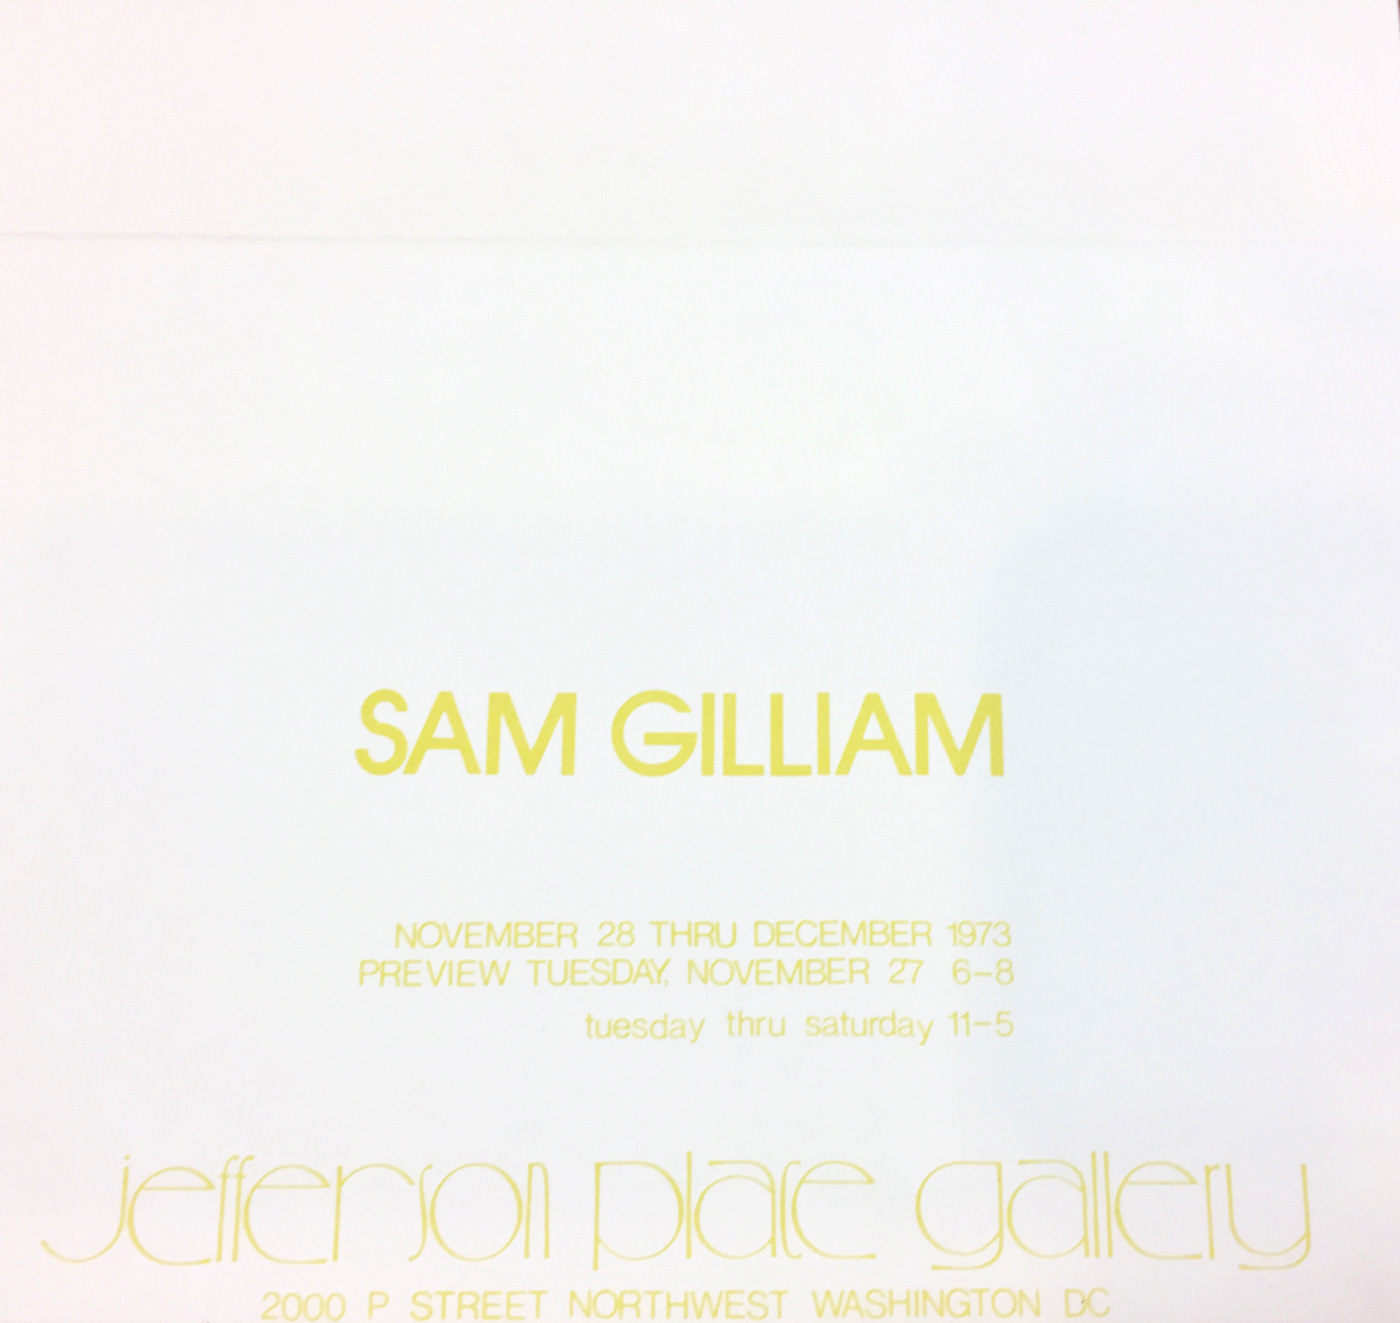 Announcement card for Sam Gilliam, 1973, at Jefferson Place Gallery